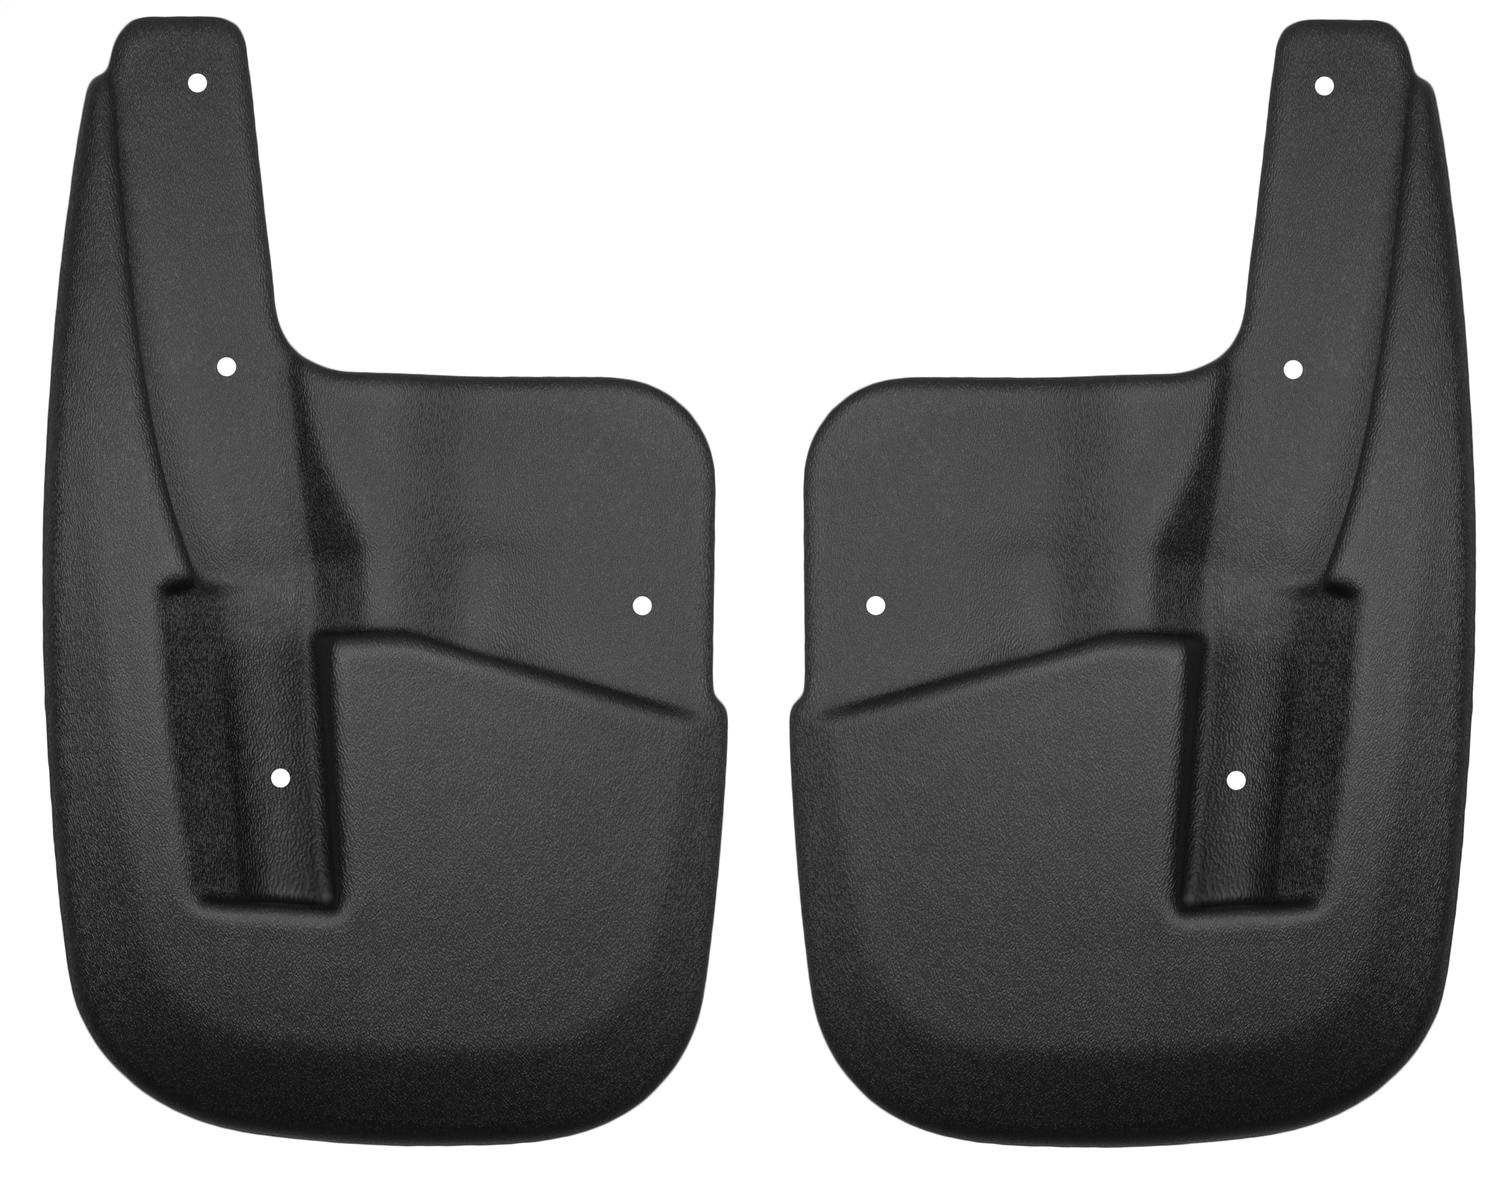 Husky Liners Husky Liners 56631 Custom Molded Mud Guards Fits 08-14 Expedition